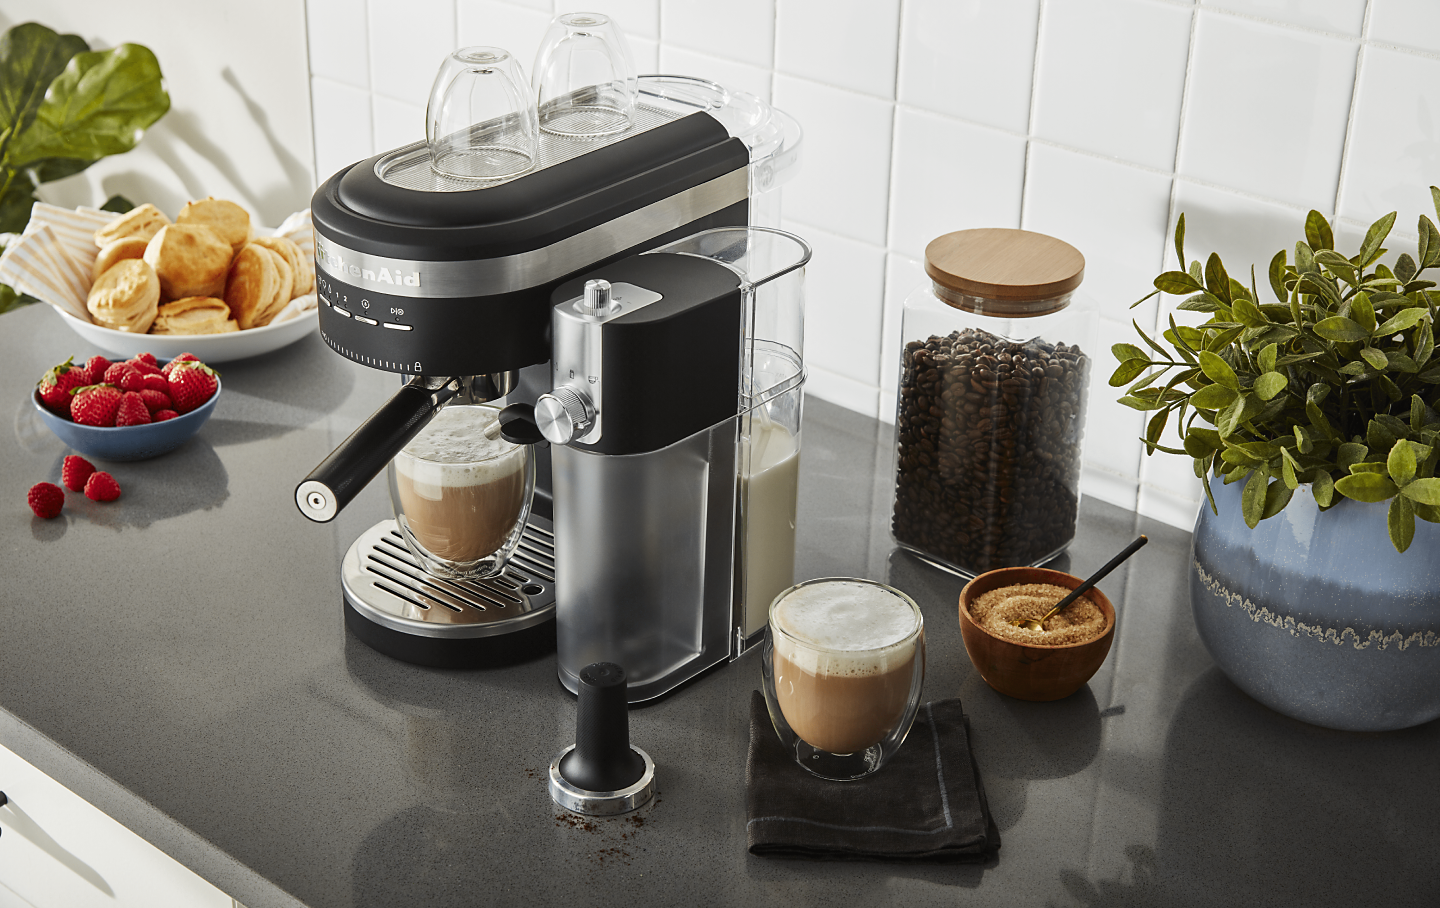 Latte in black KitchenAid® Espresso Machine with Automatic Milk Frother Attachment on counter with ingredients